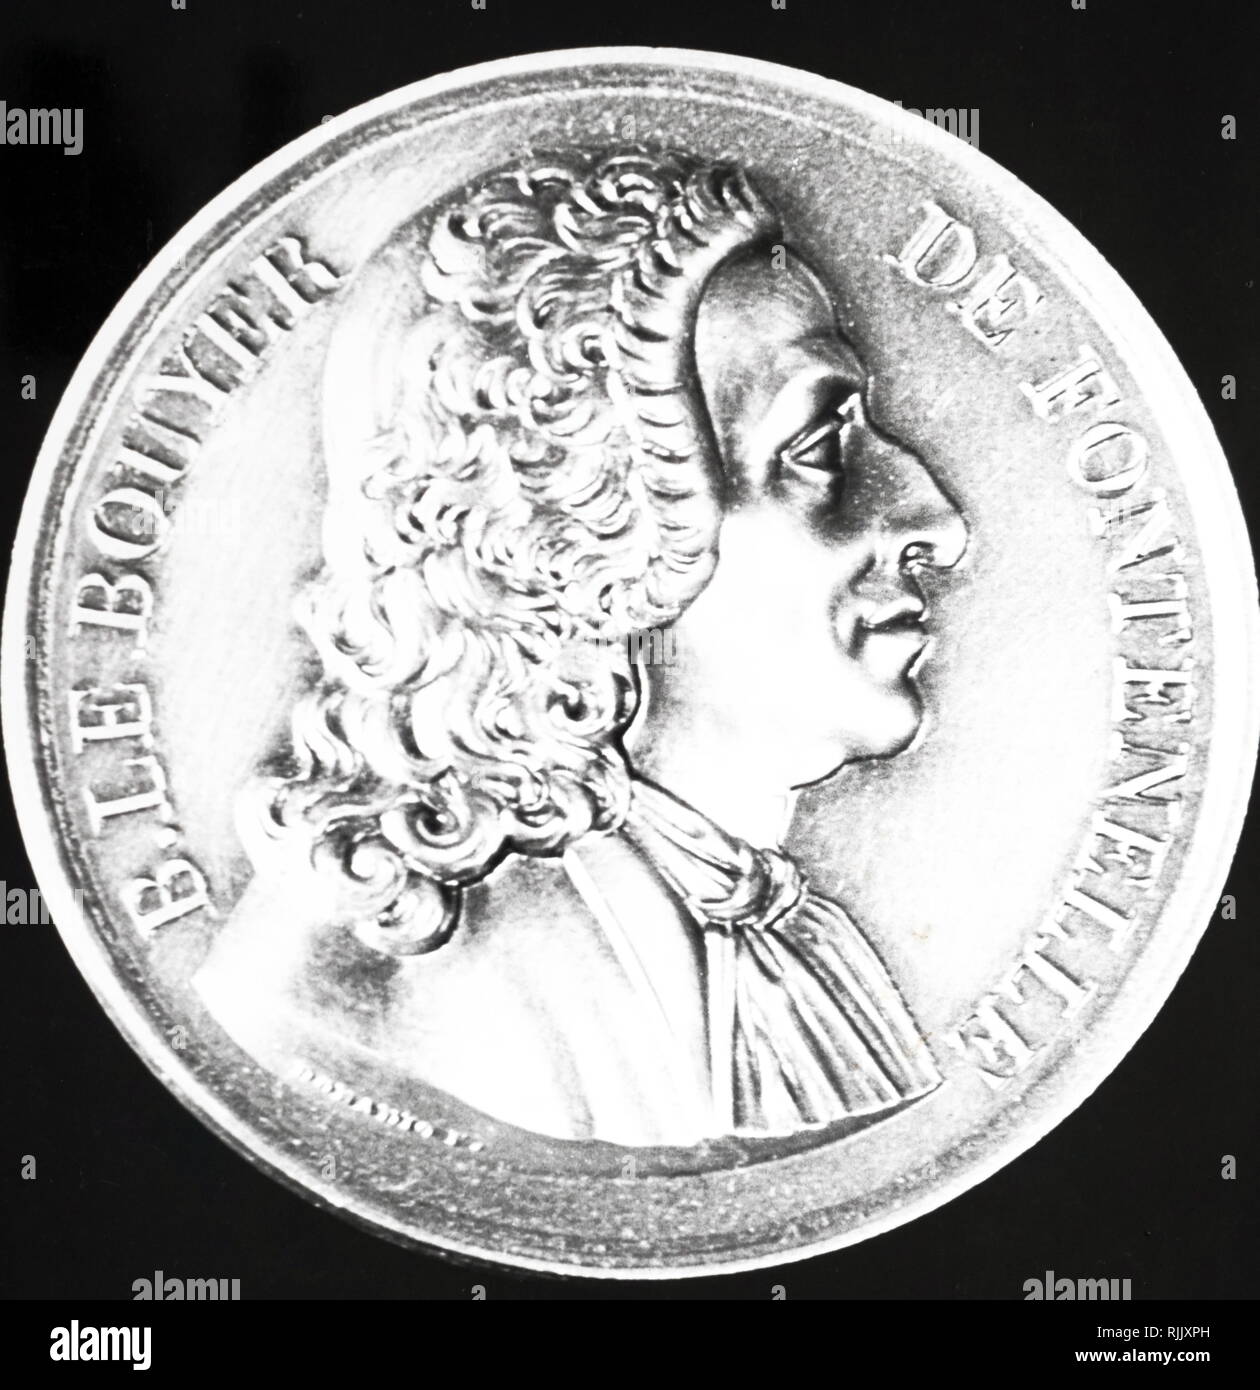 A commemorative coin depicting Bernard Le Bovier de Fontenelle (1657-1757) a French author and an influential member of three of the academies of the Institut de France. Dated 20th century Stock Photo